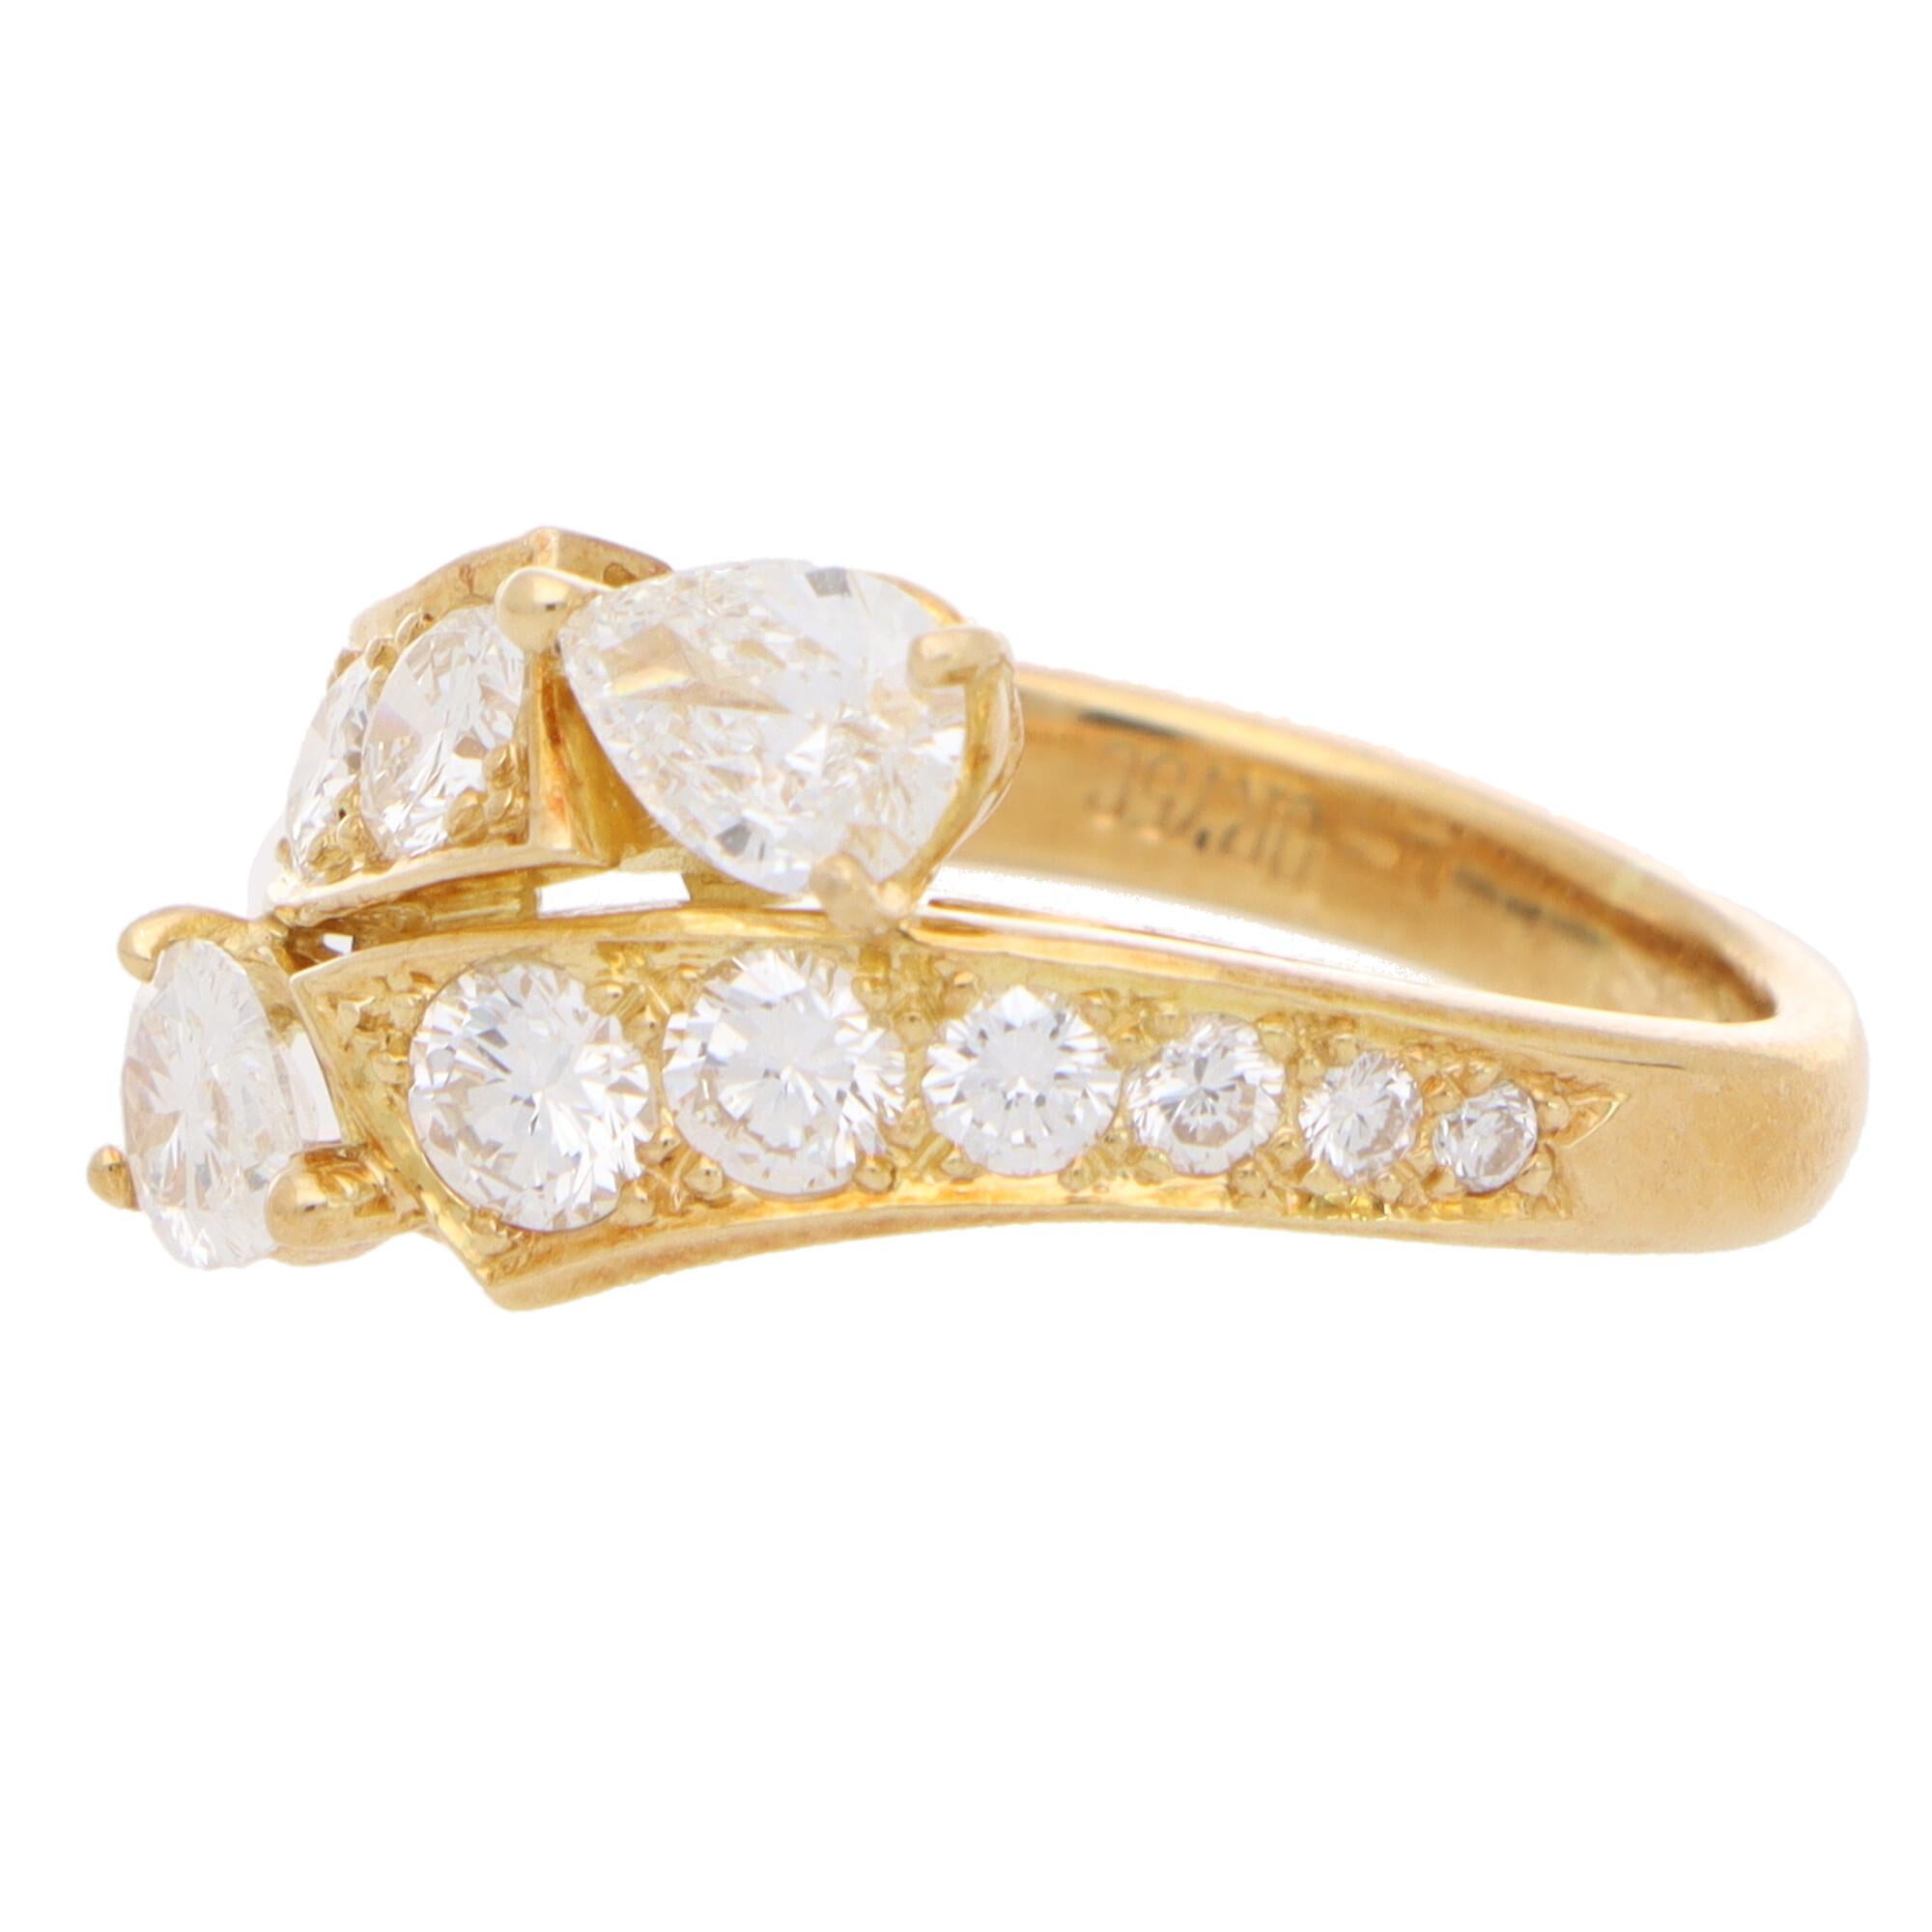 Contemporary Vintage Piaget Toi-et-moi Diamond Crossover Ring Set in 18k Yellow Gold